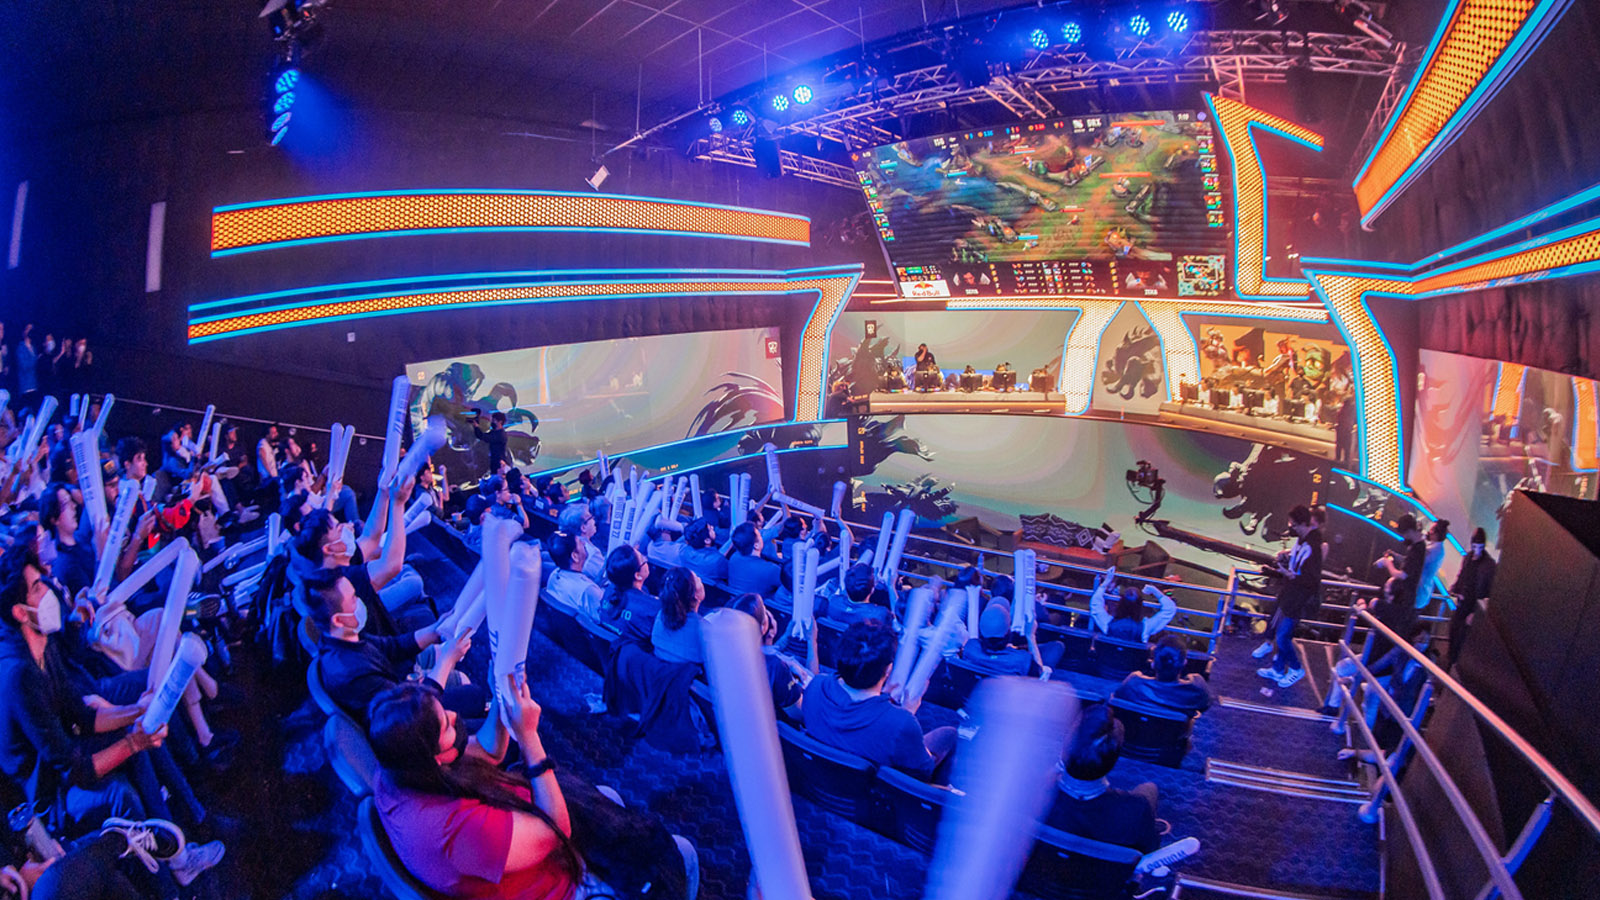 MEXICO CITY, MEXICO - OCTOBER 01: Fans cheer in the audience at the League of Legends World Championship Play-Ins stage on October 1, 2022 in Mexico City, Mexico.